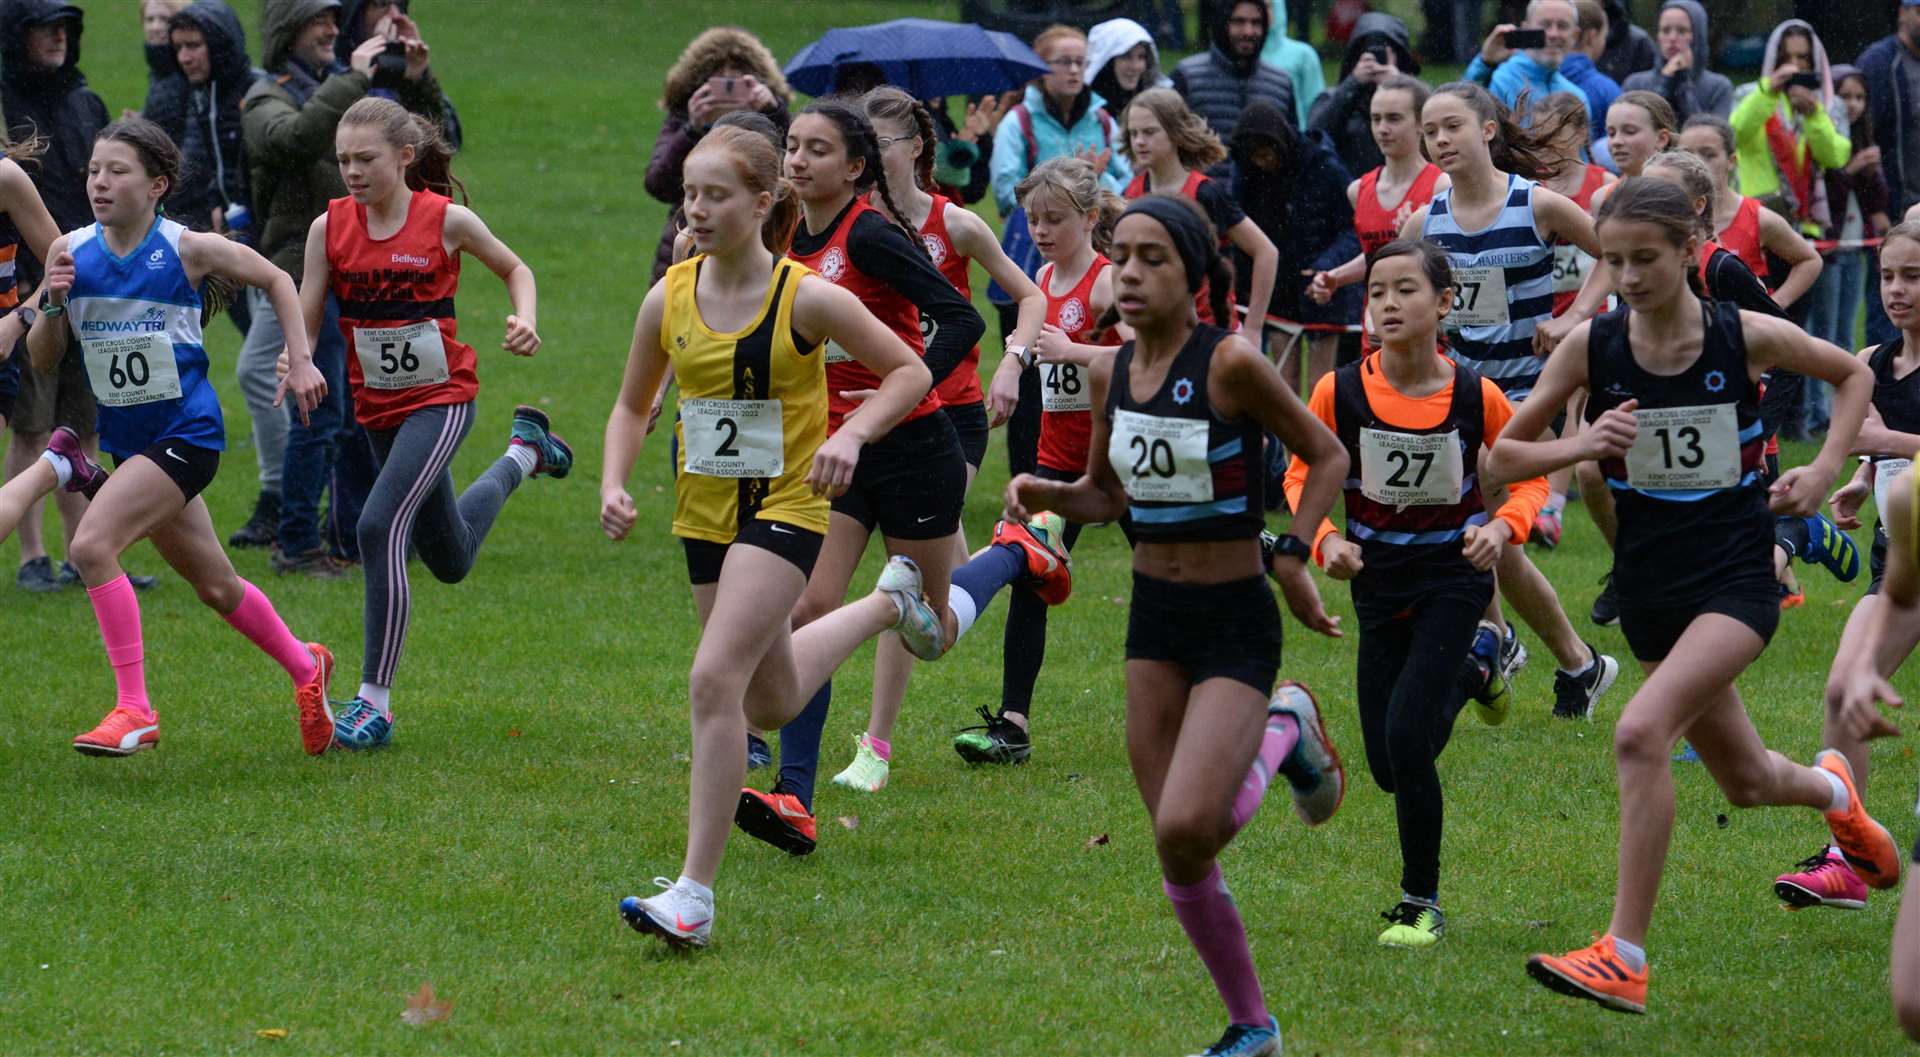 No.60 Hannah Oliver Painter (Medway Tri), No.2 Constance Druggan-Cheery (Ashford AC), No.20 Naimah Mossia (Blackheath and Bromley Harriers AC), No.27 Sophie Tran (Blackheath and Bromley Harriers AC) and No.13 Sophie Fleming (Blackheath and Bromley Harriers AC) hit their stride in the under-13 girls' race. Picture: Chris Davey (52347945)